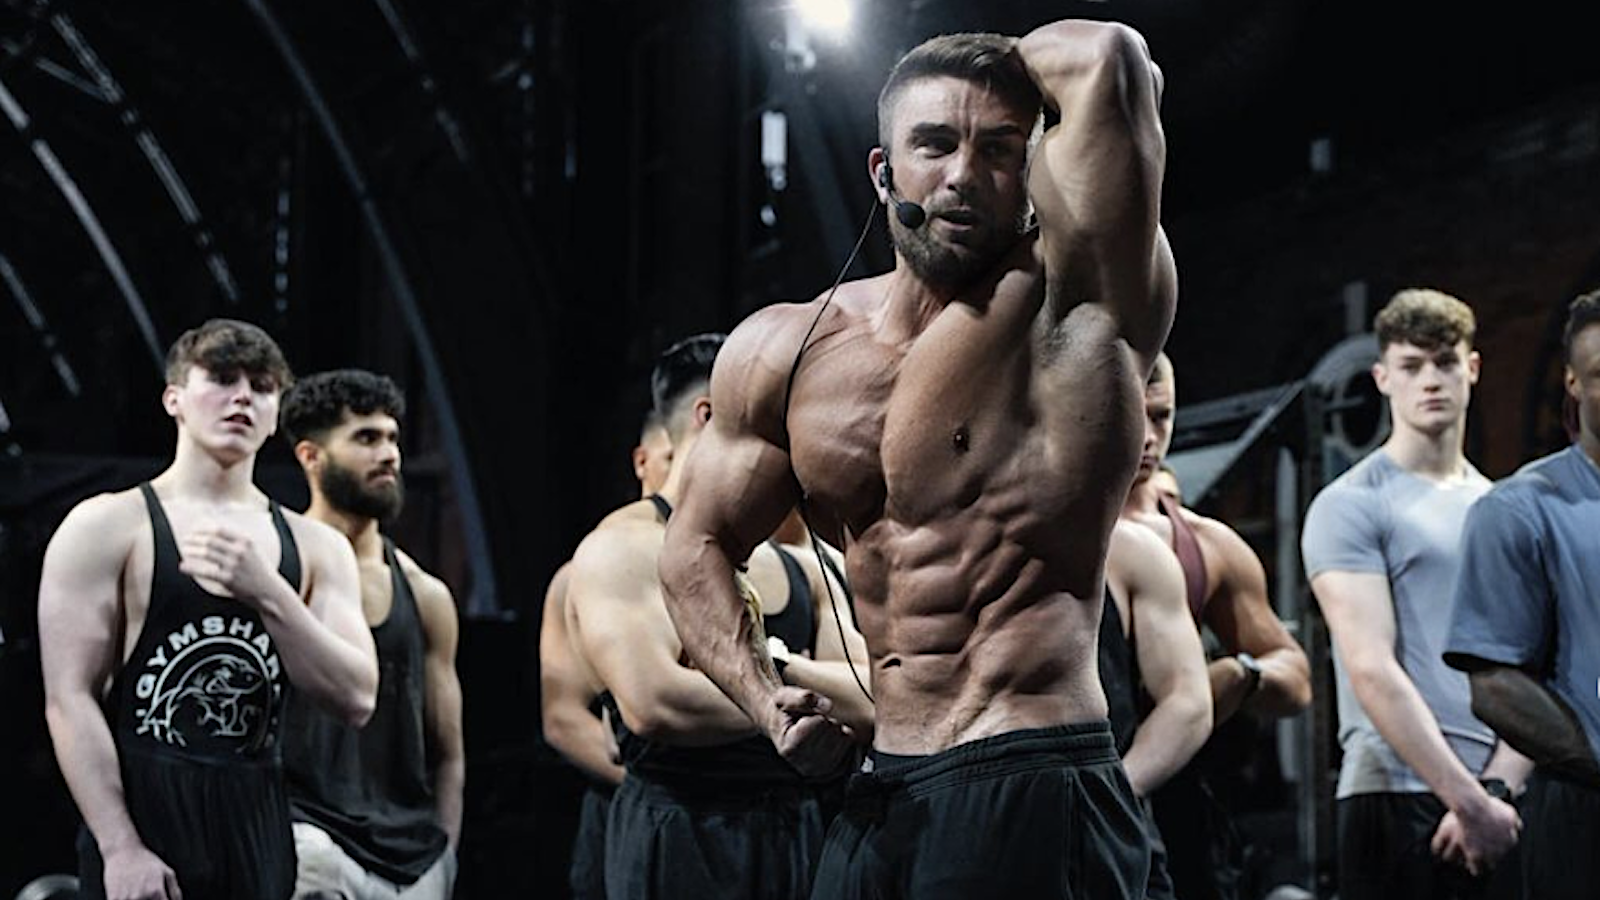 How I Went From A Plumber To A Professional Bodybuilding Champion With 1  Million Instagram Followers | Sustain Health Magazine